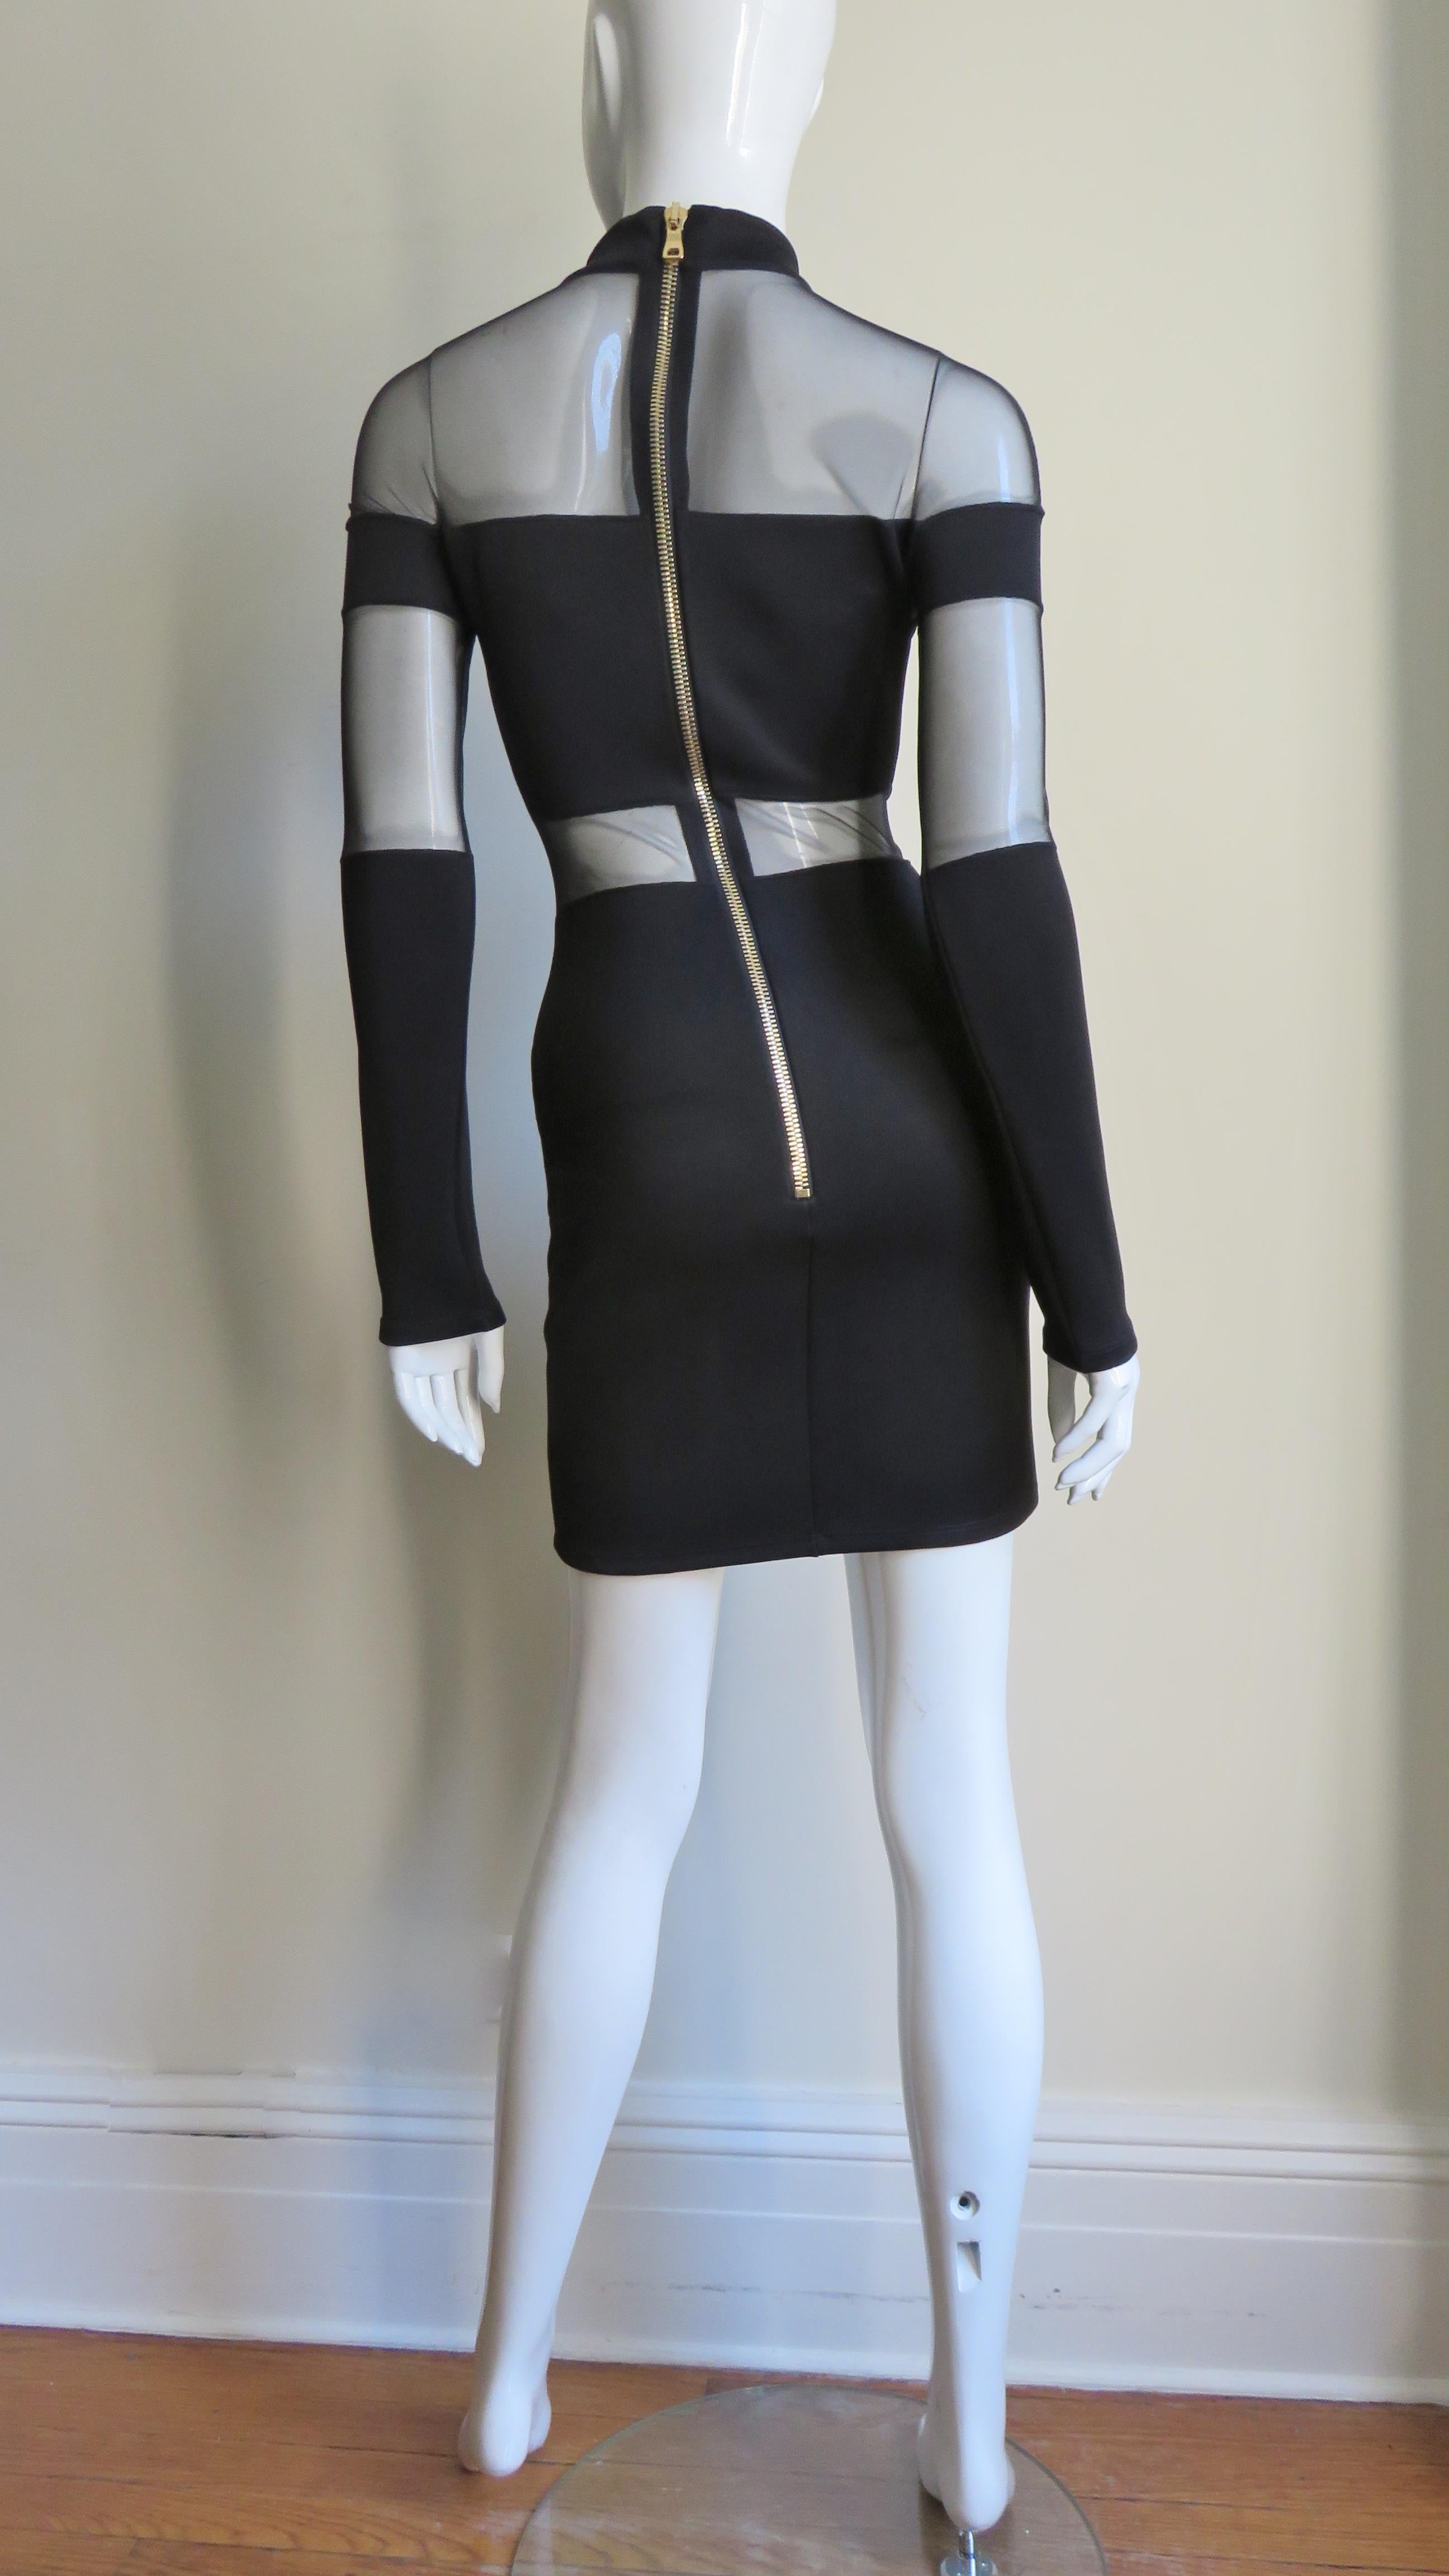 Pierre Balmain Bodycon Dress with Sheer Shoulders and Waist For Sale 9